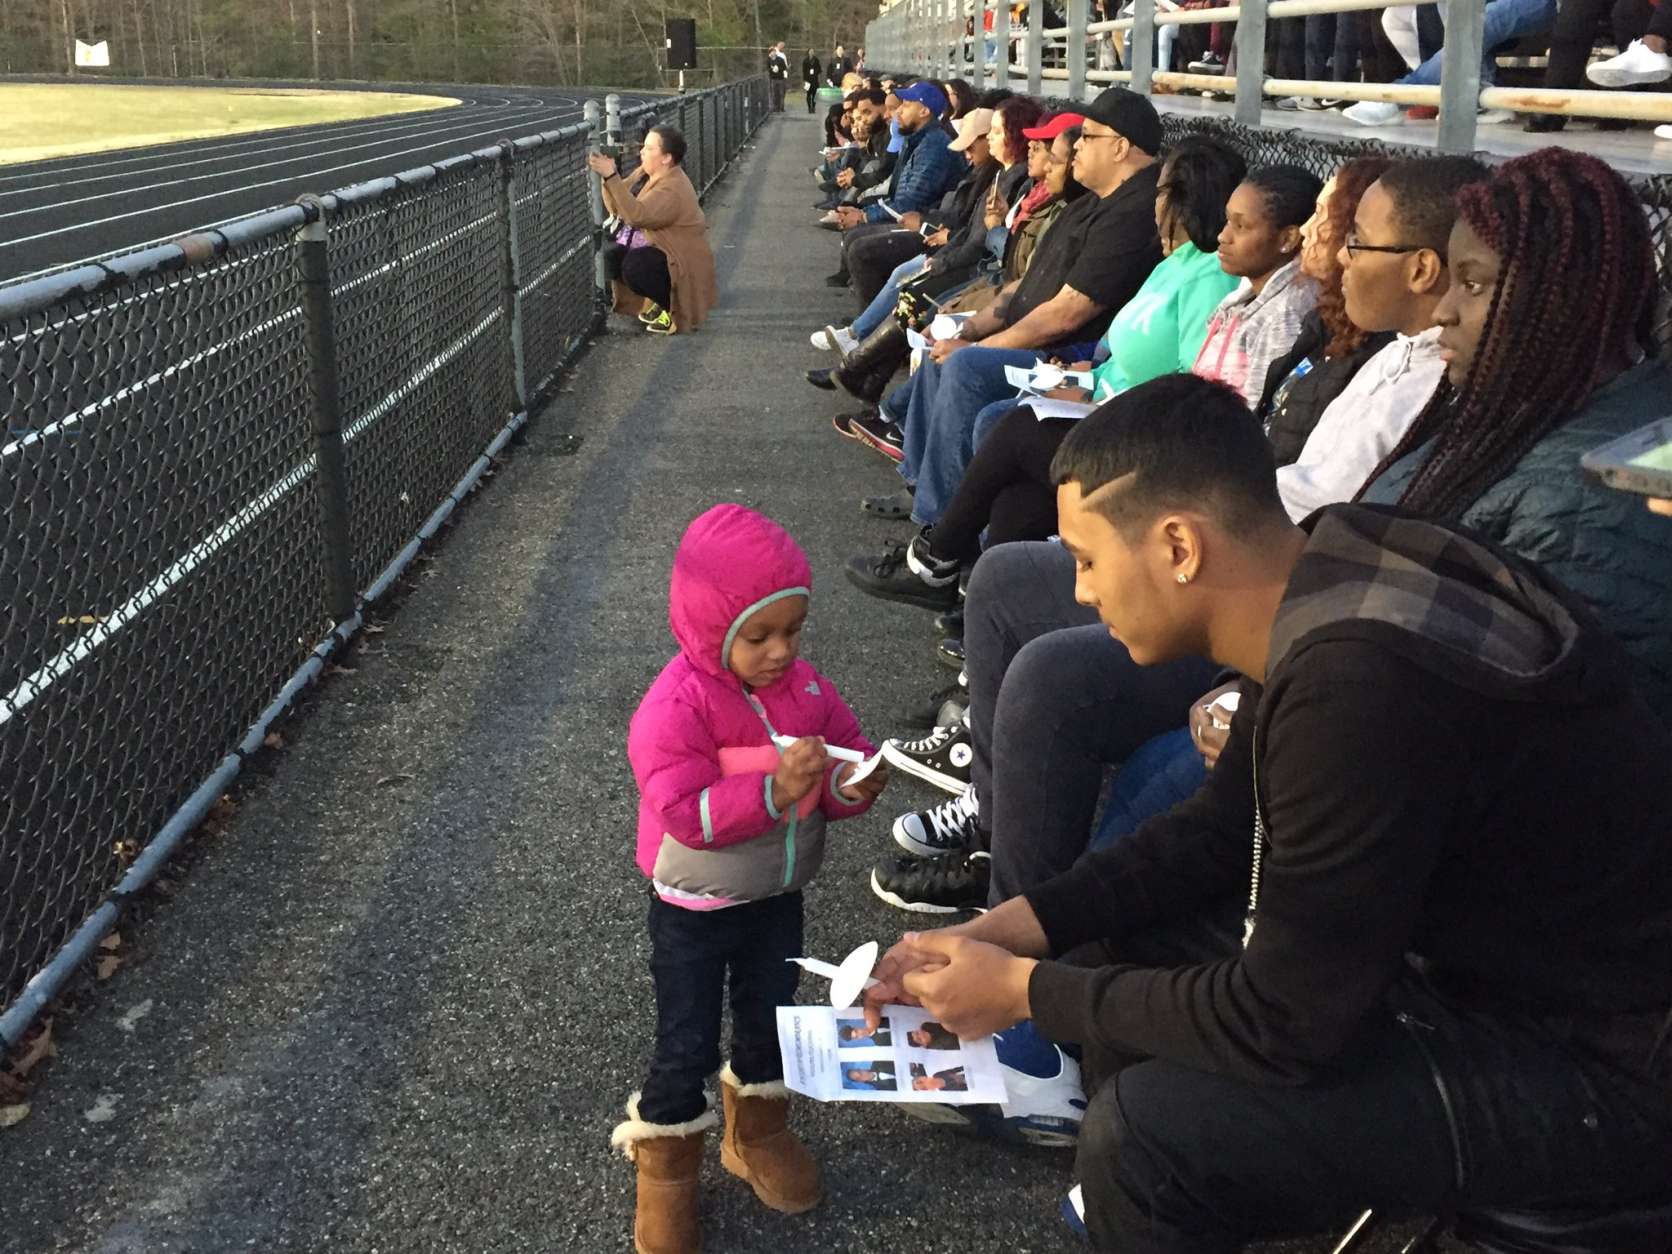 Bleachers were full at Wednesday's memorial in Waldorf, and family members were in attendance. (WTOP/Michelle Basch)